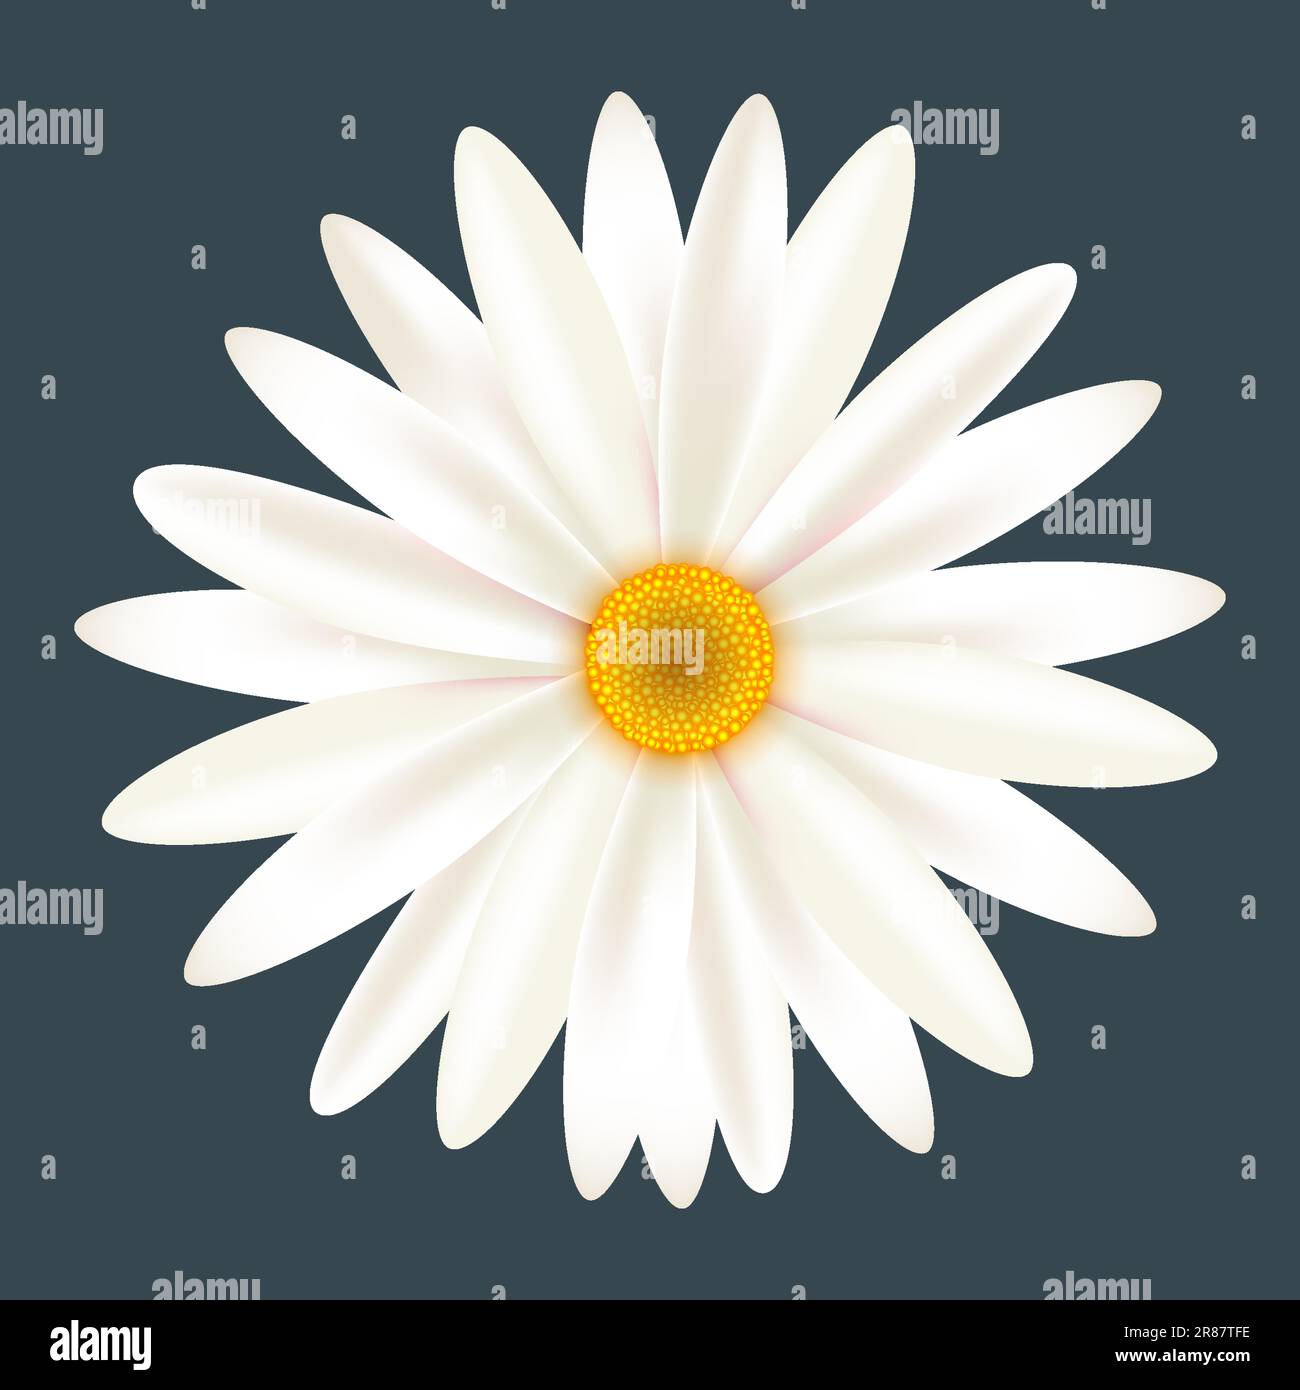 White Daisy Chamomile Flower Isolated On Charcoal Background Stock Vector